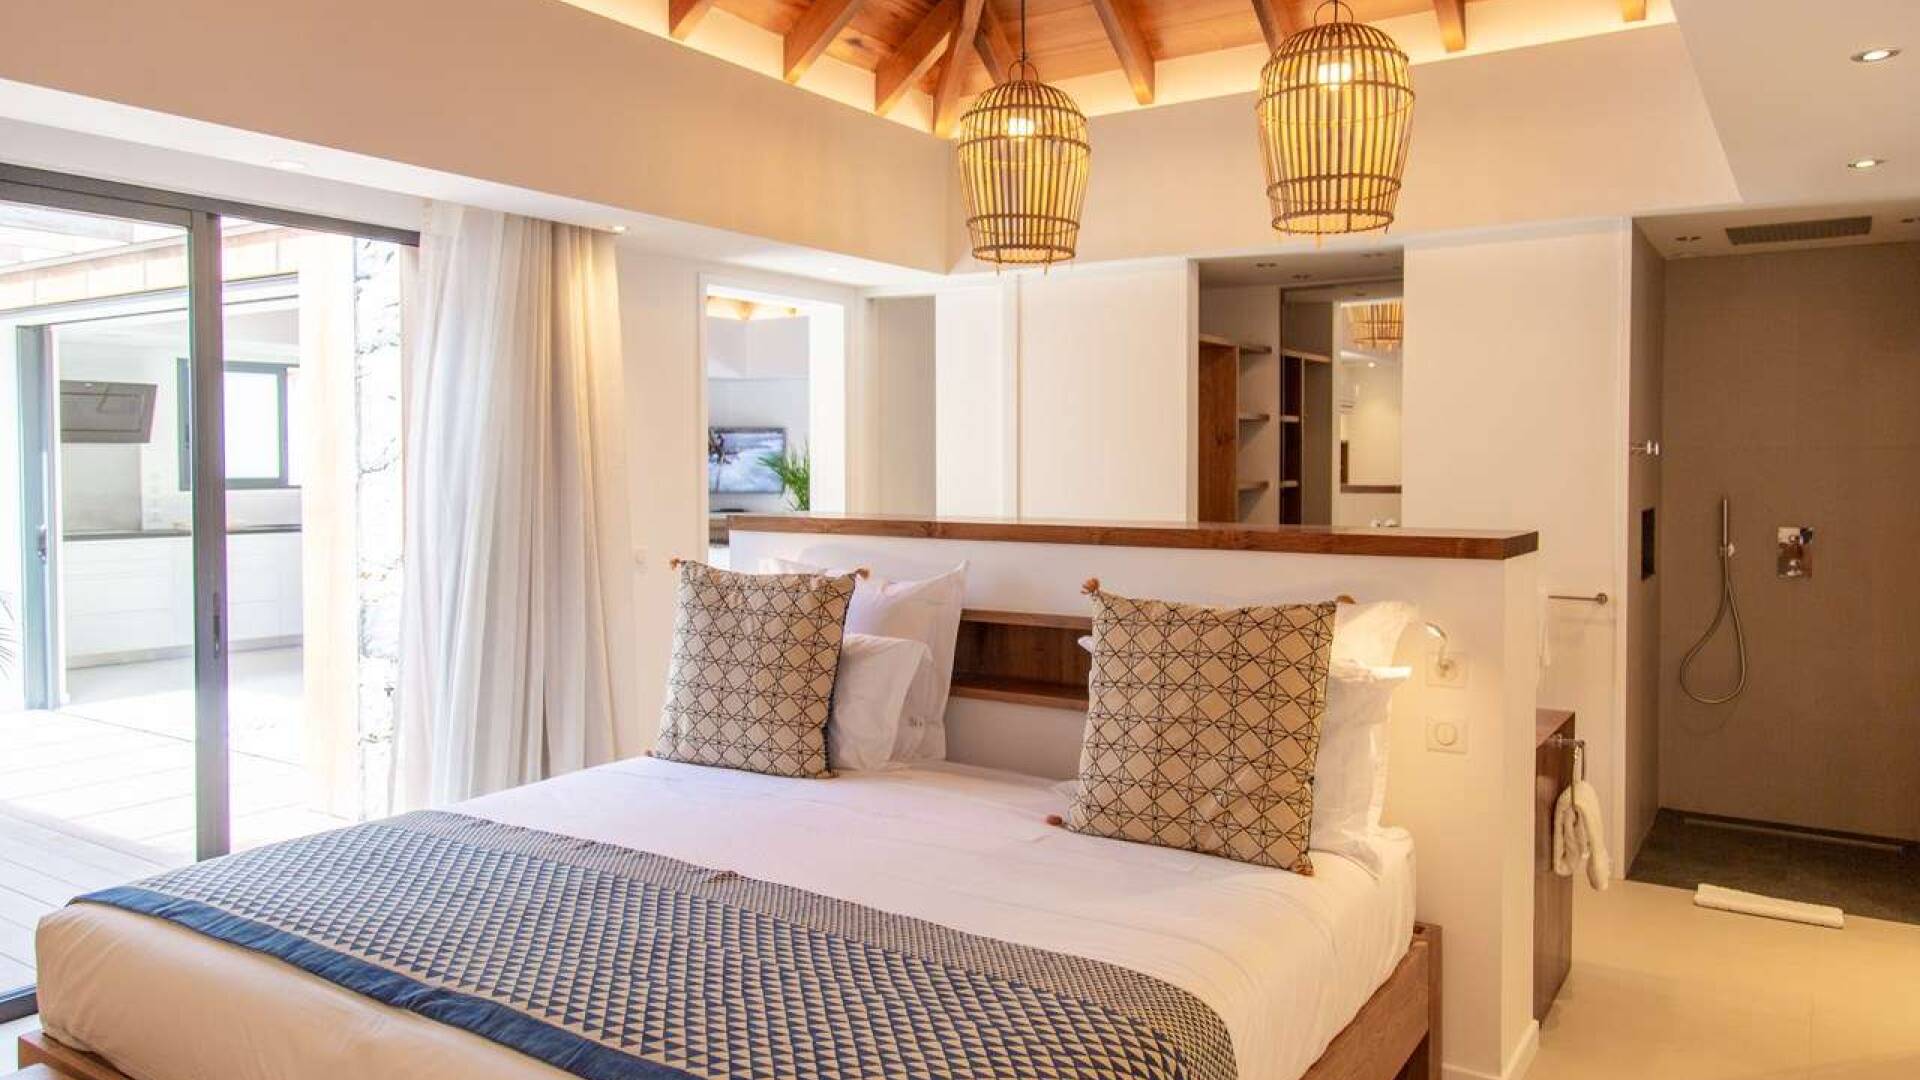 Bedroom at WV ACF, Anse des Cayes, St. Barthelemy